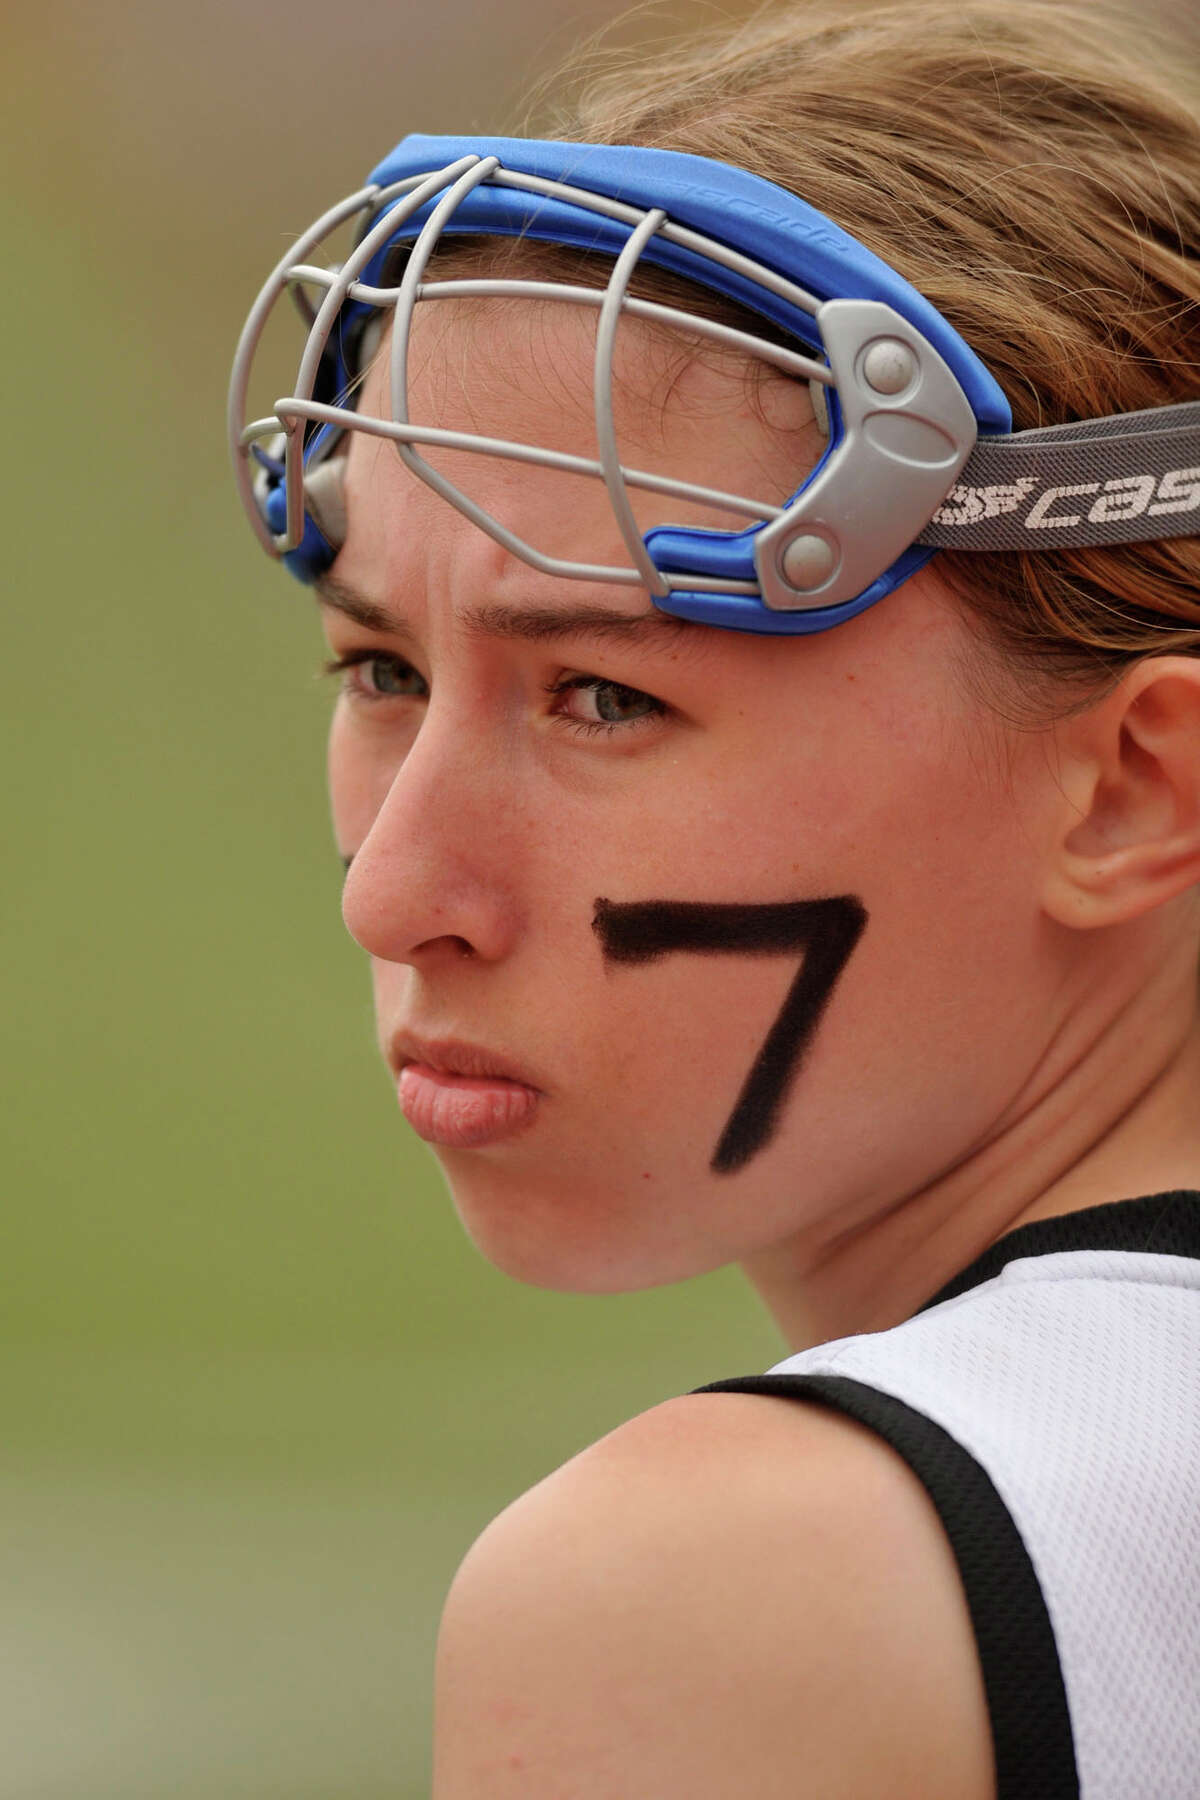 Stamford's Kirstin McLeod looks on from the sidelines during the Black Knights' game against Fairfield Warde at Stamford High School in Stamford, Conn., on Tuesday, April 22, 2014. Fairfield Warde won, 12-6.